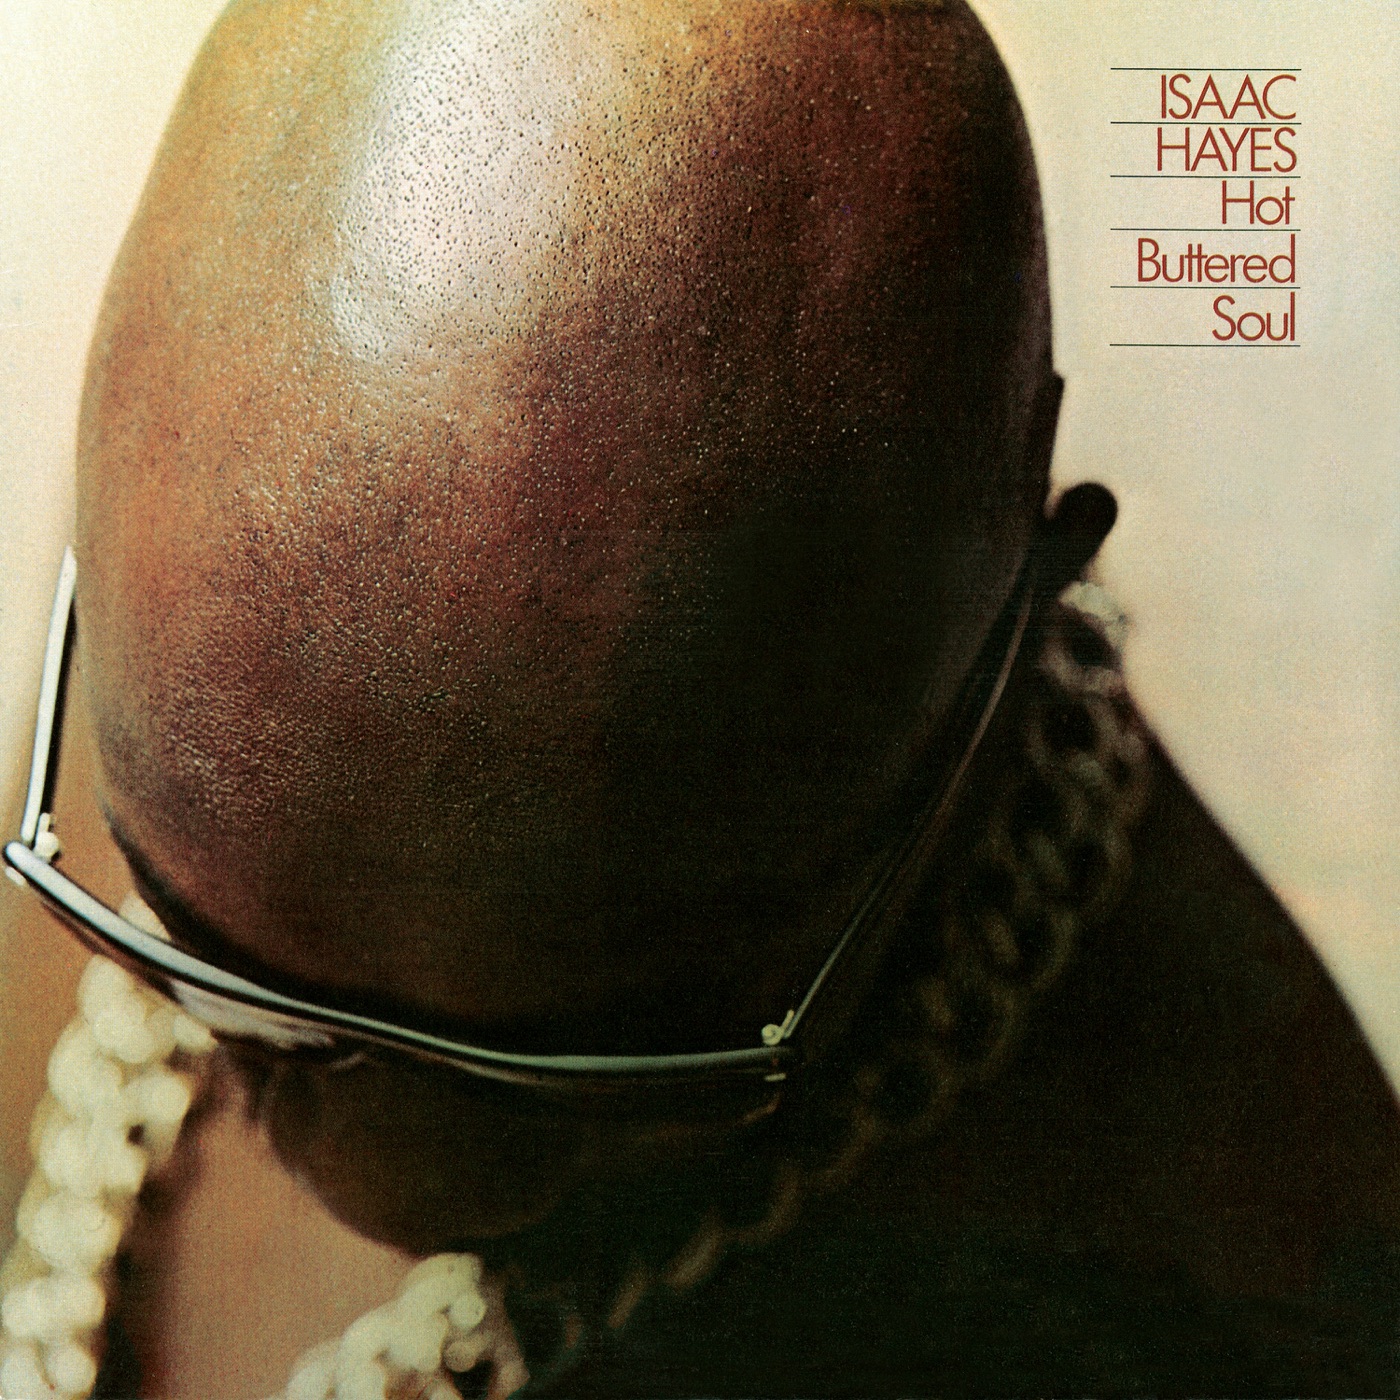 Hot Buttered Soul by Isaac Hayes